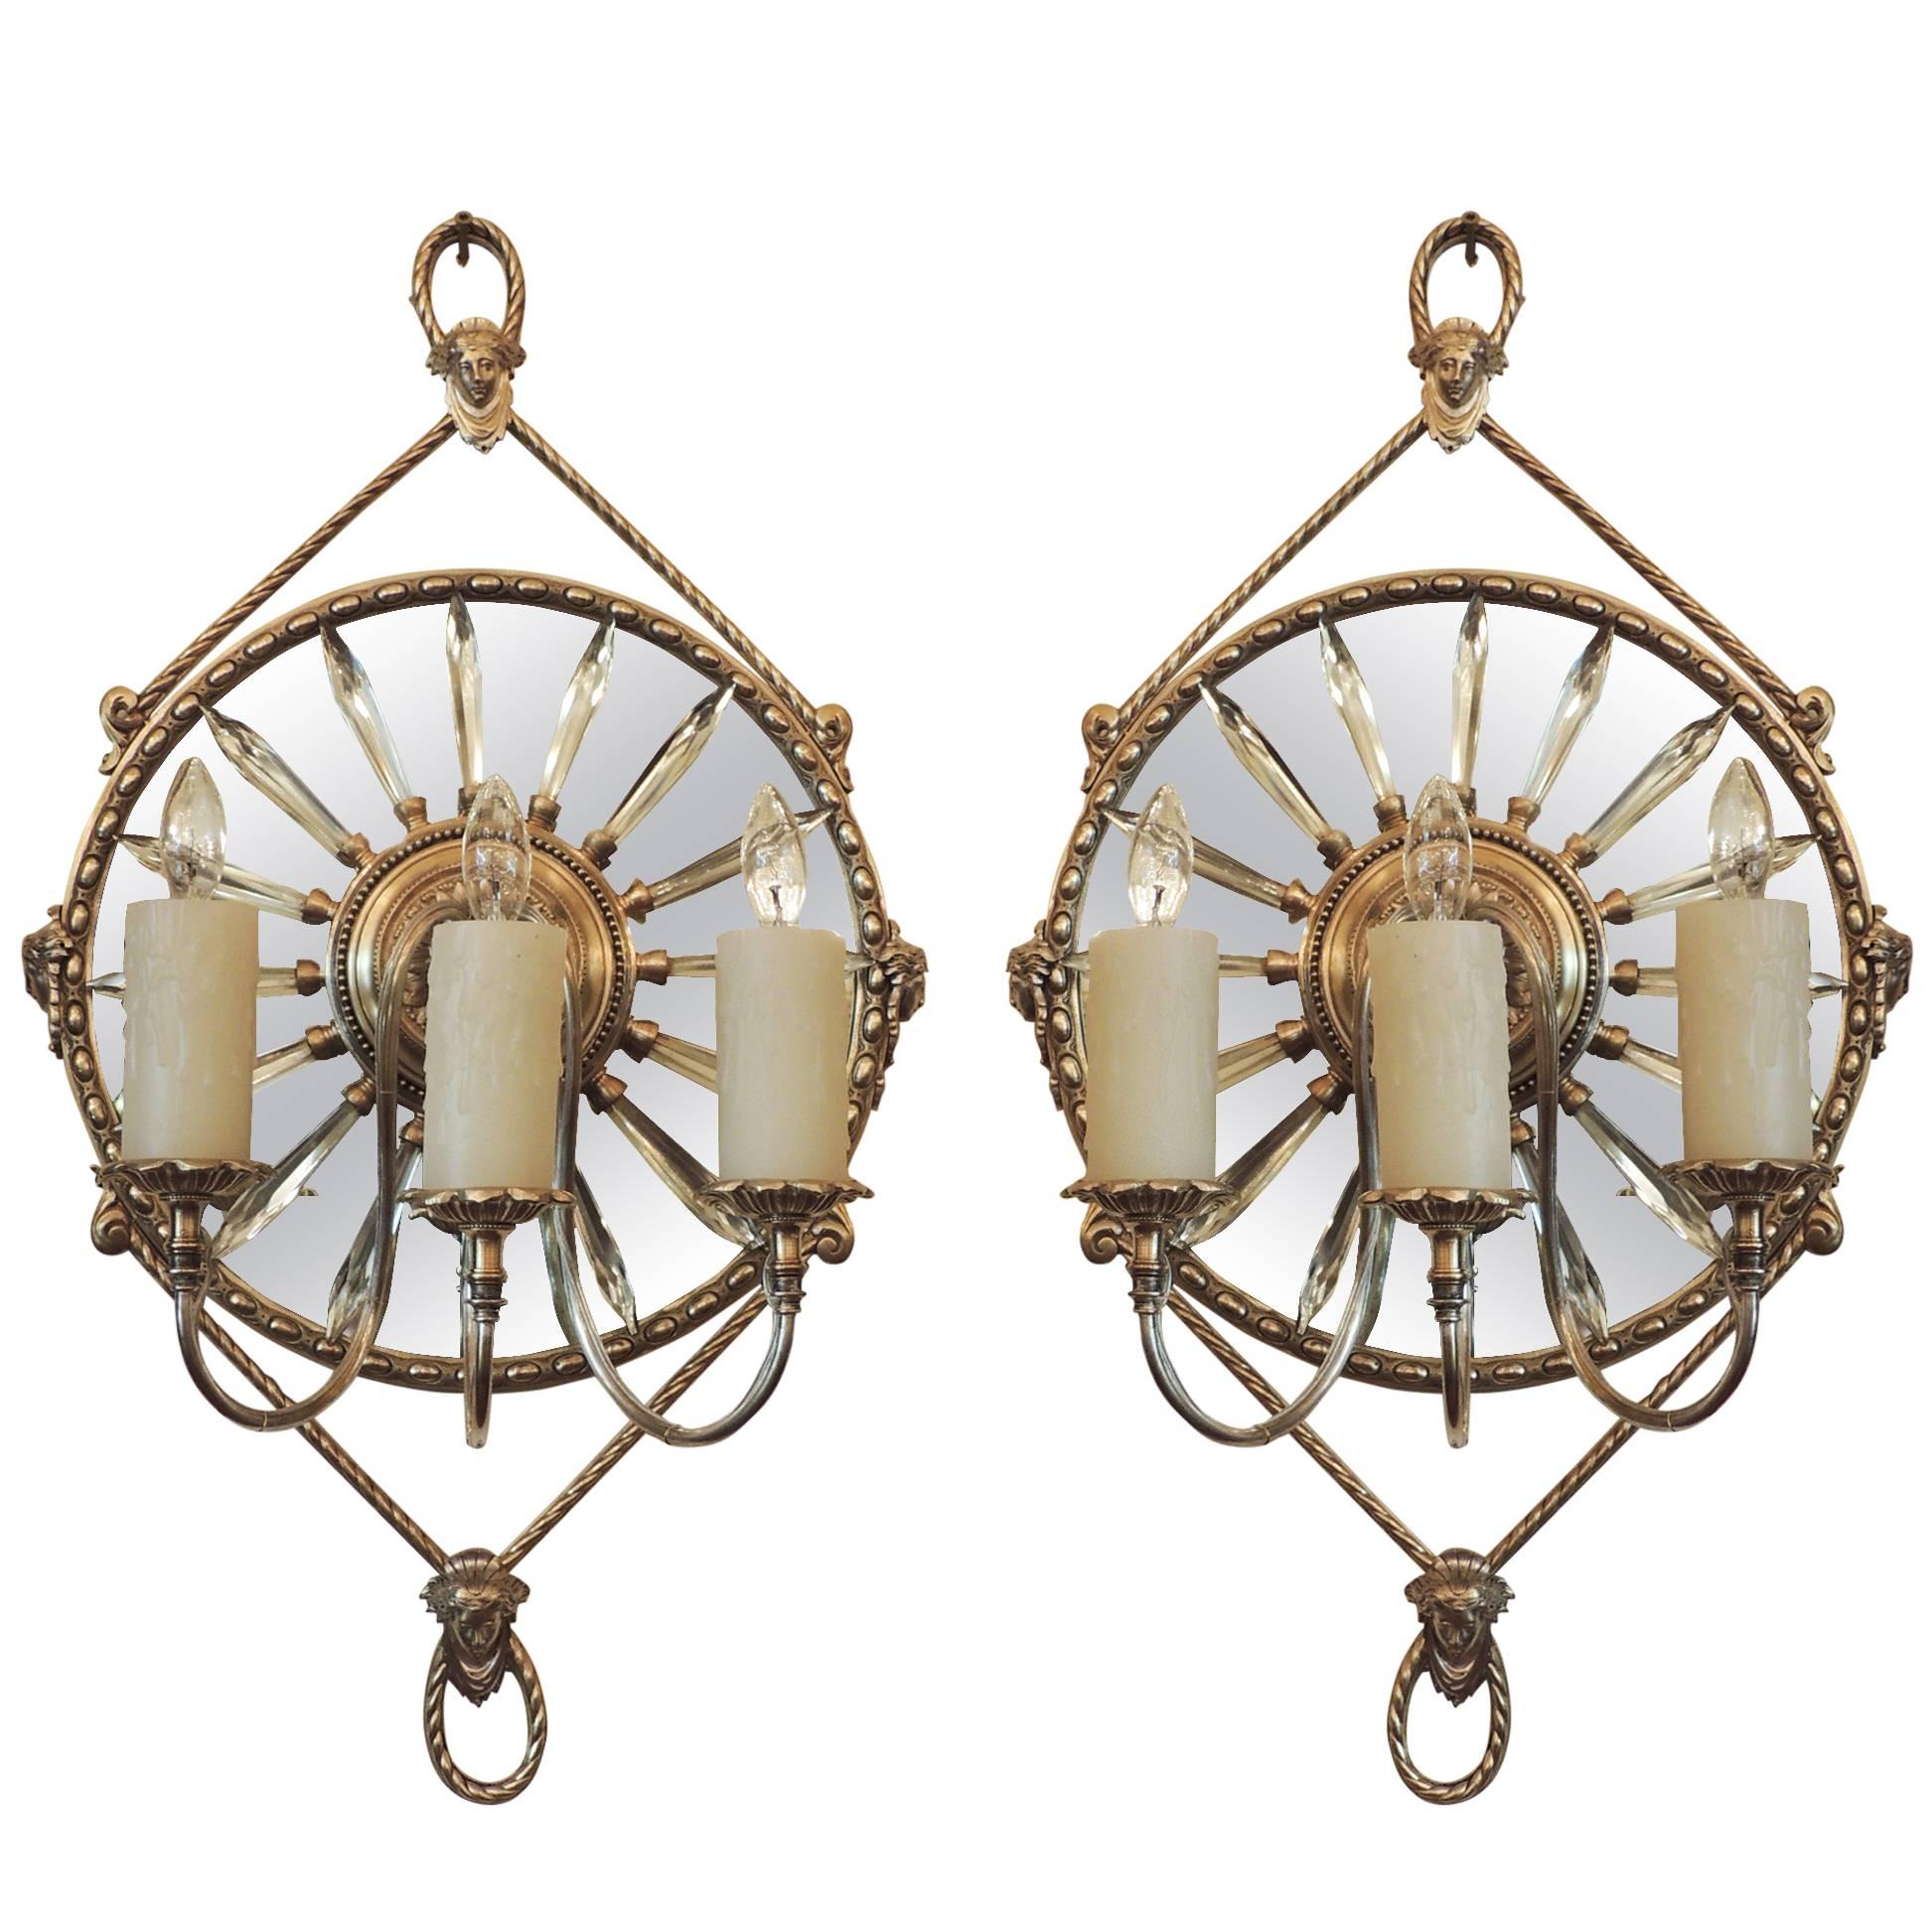 19th C English Mirrored Bronze and Crystal Sconces by James Green